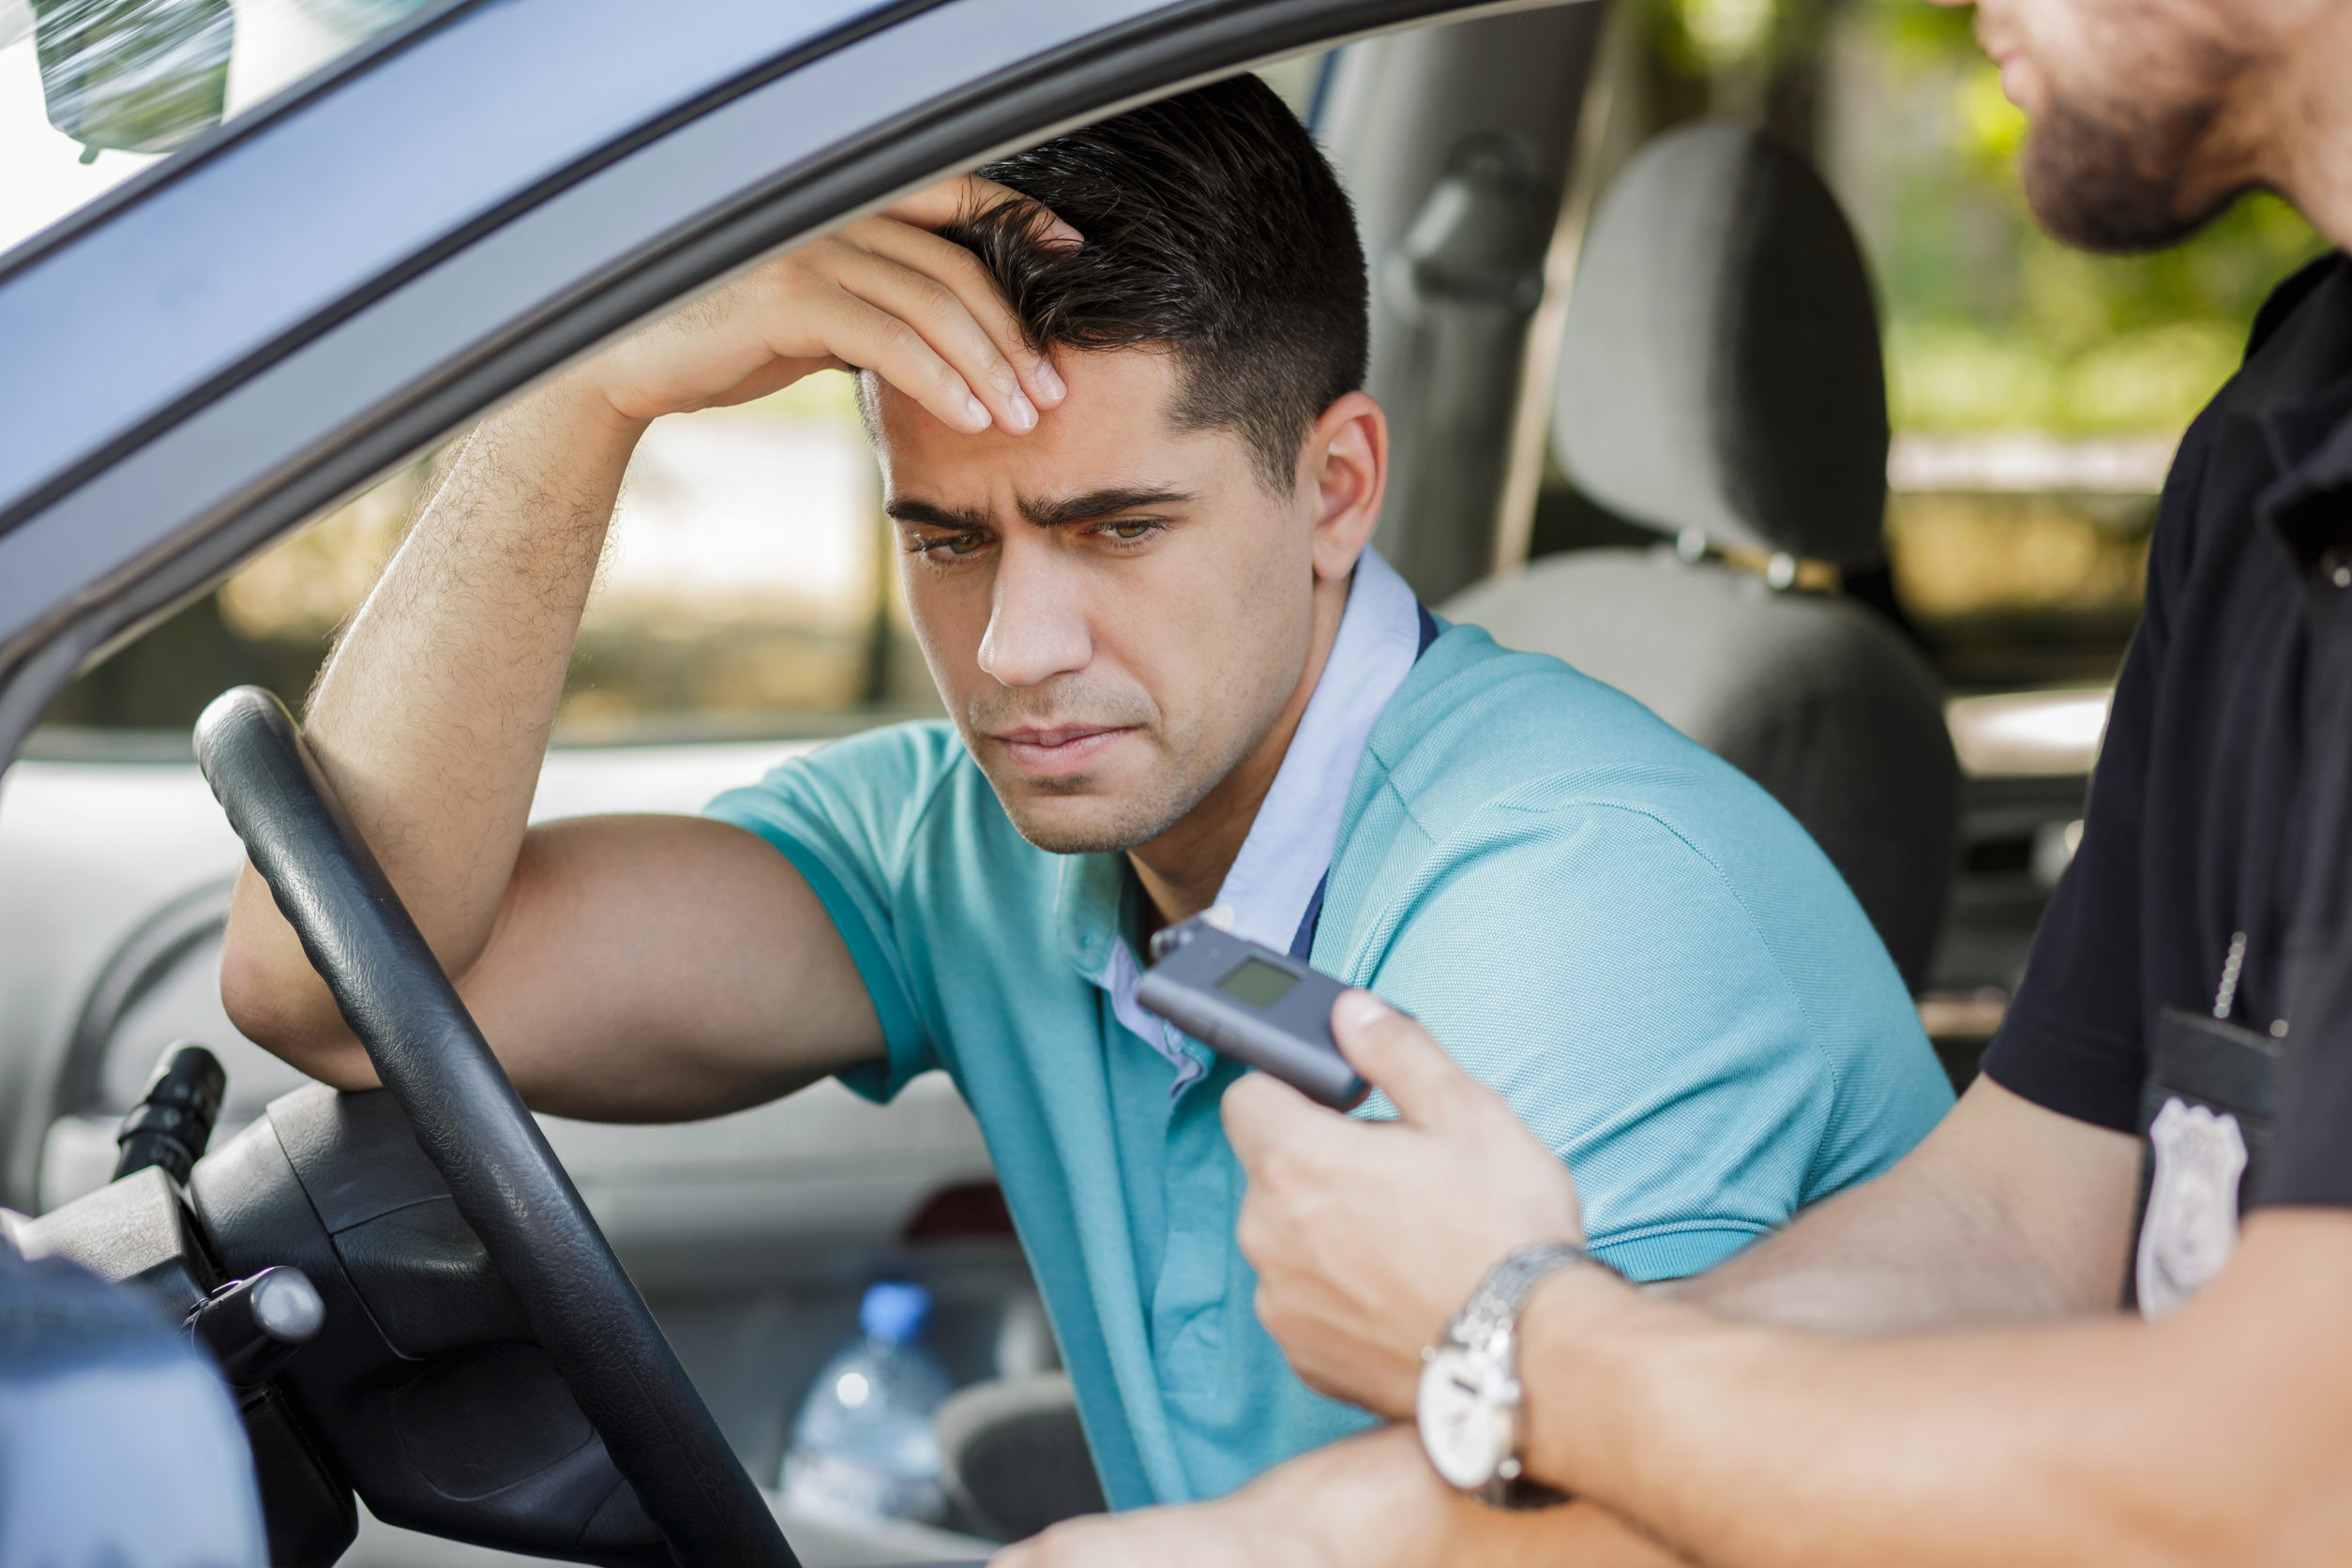 Colorado DUI & DWAI: Understanding The Differences & Legal Consequences